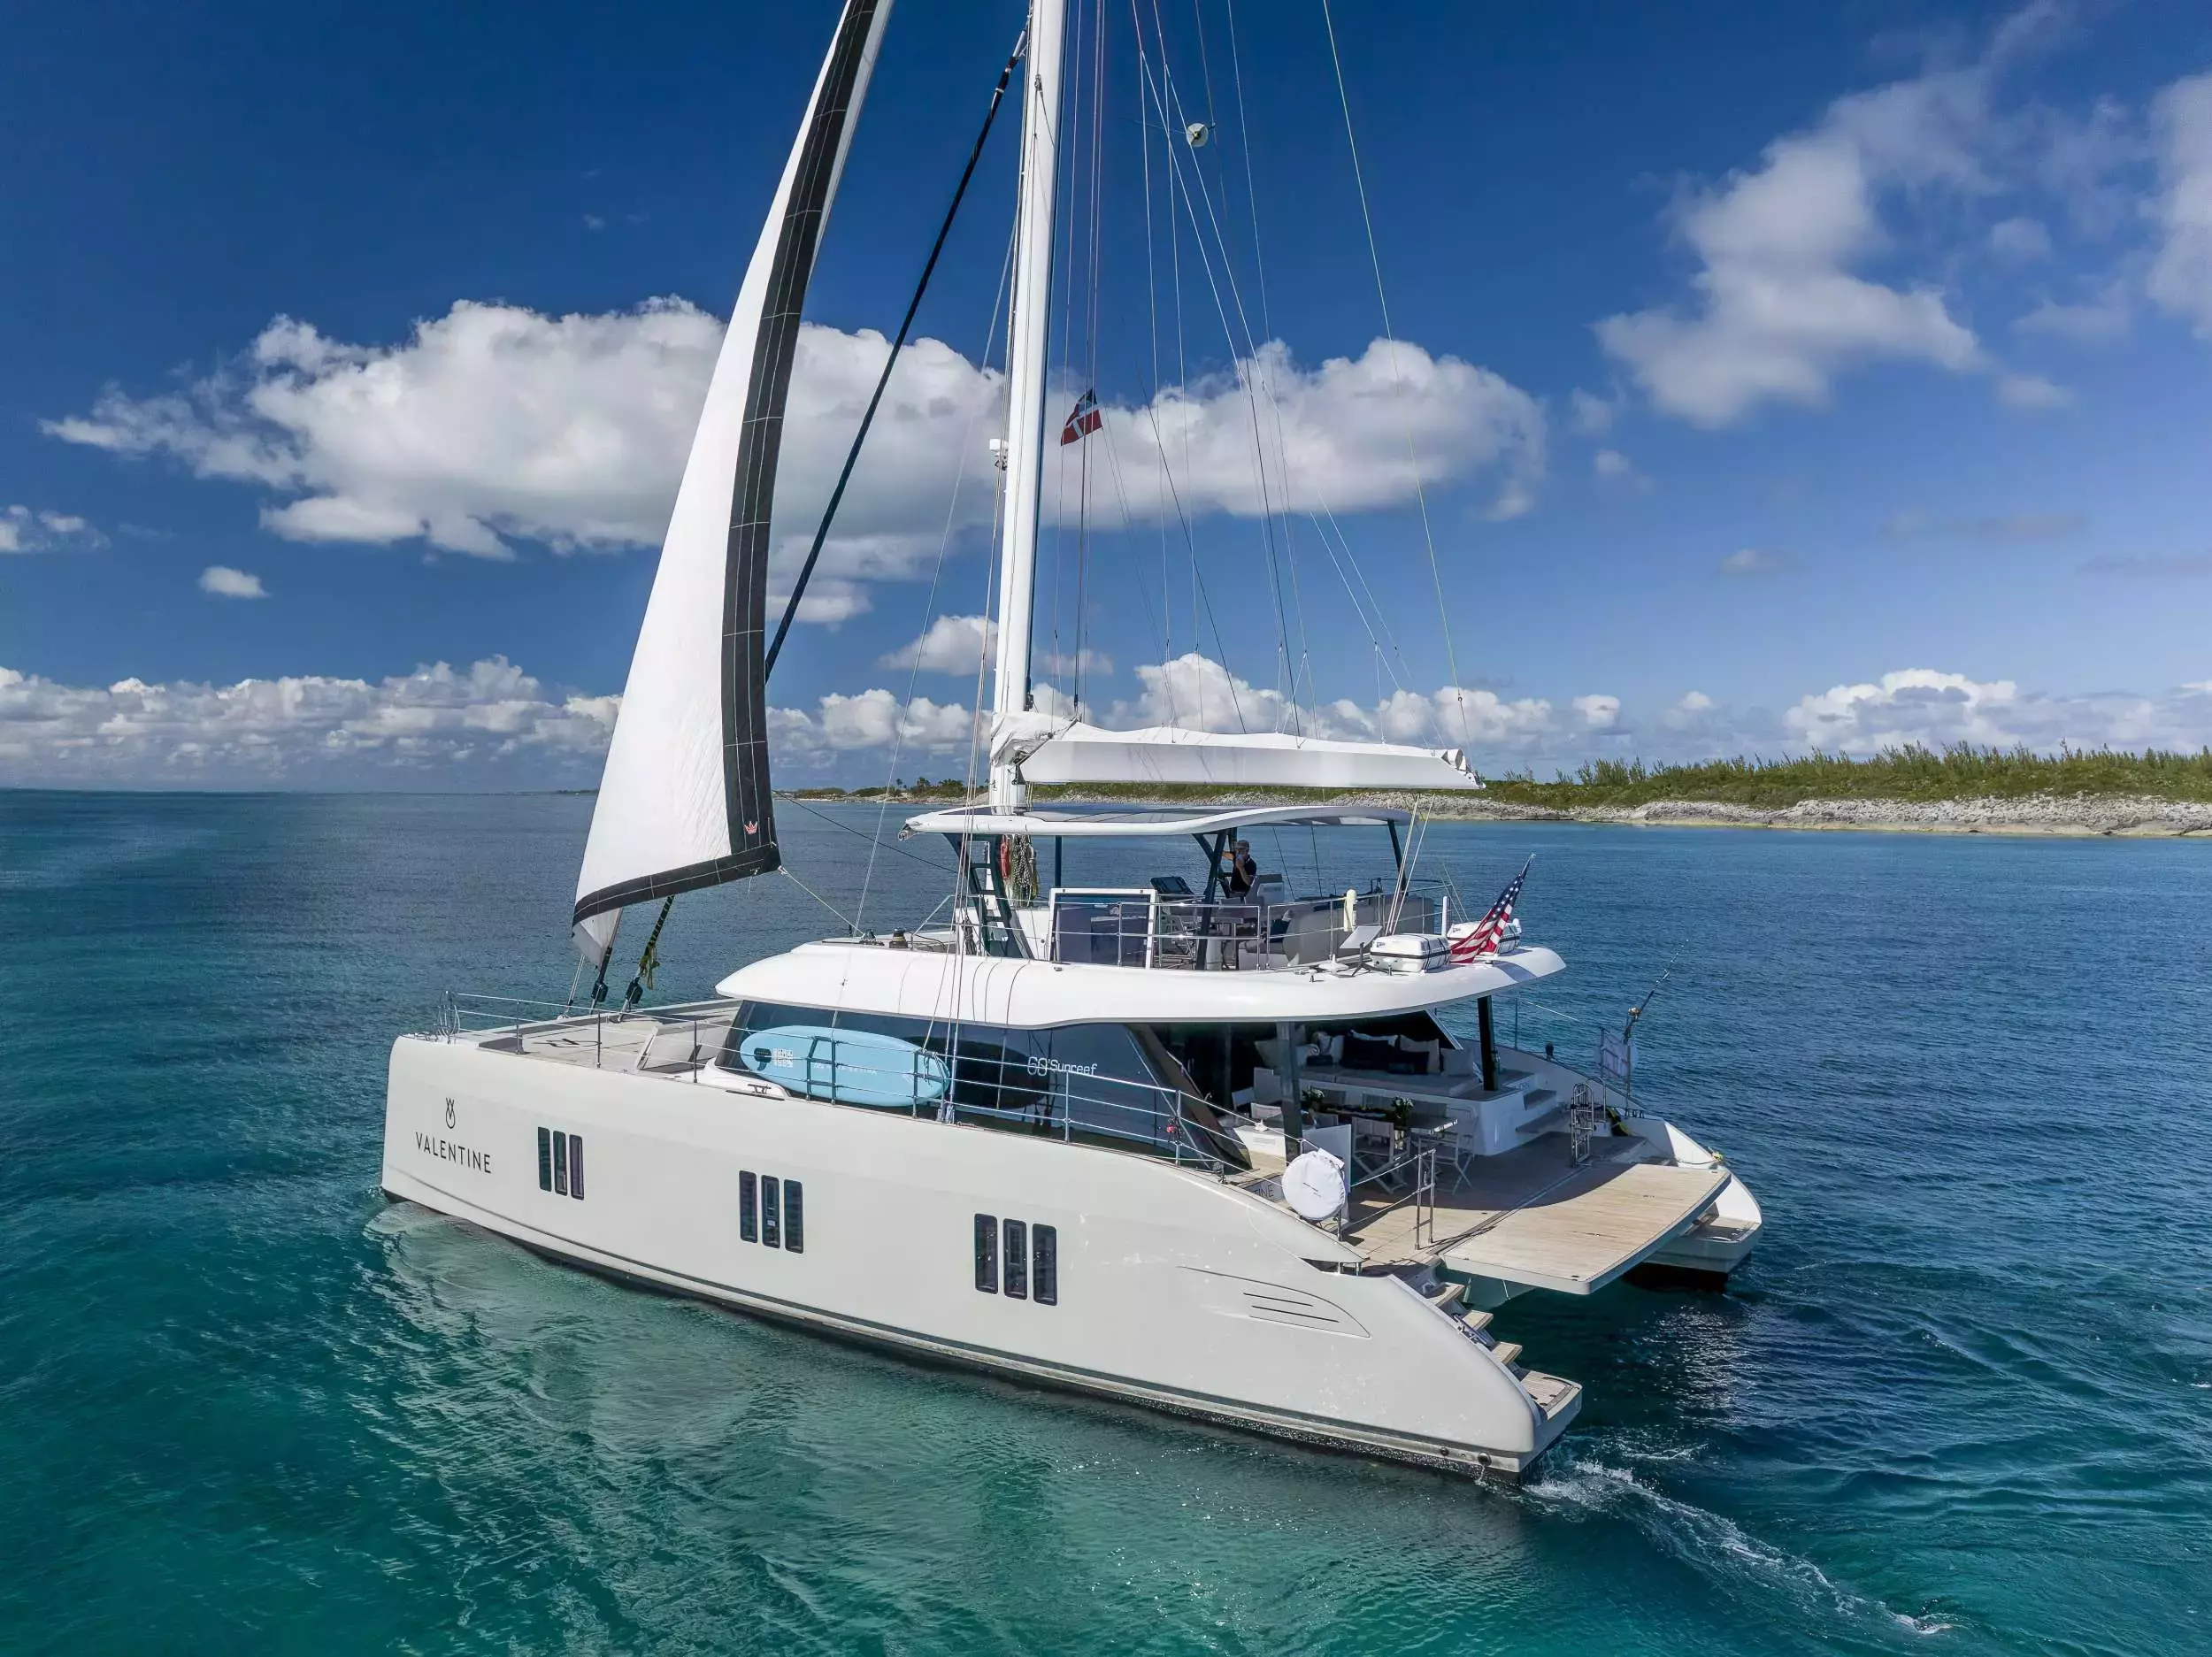 Valentine by Sunreef Yachts - Special Offer for a private Power Catamaran Rental in Virgin Gorda with a crew